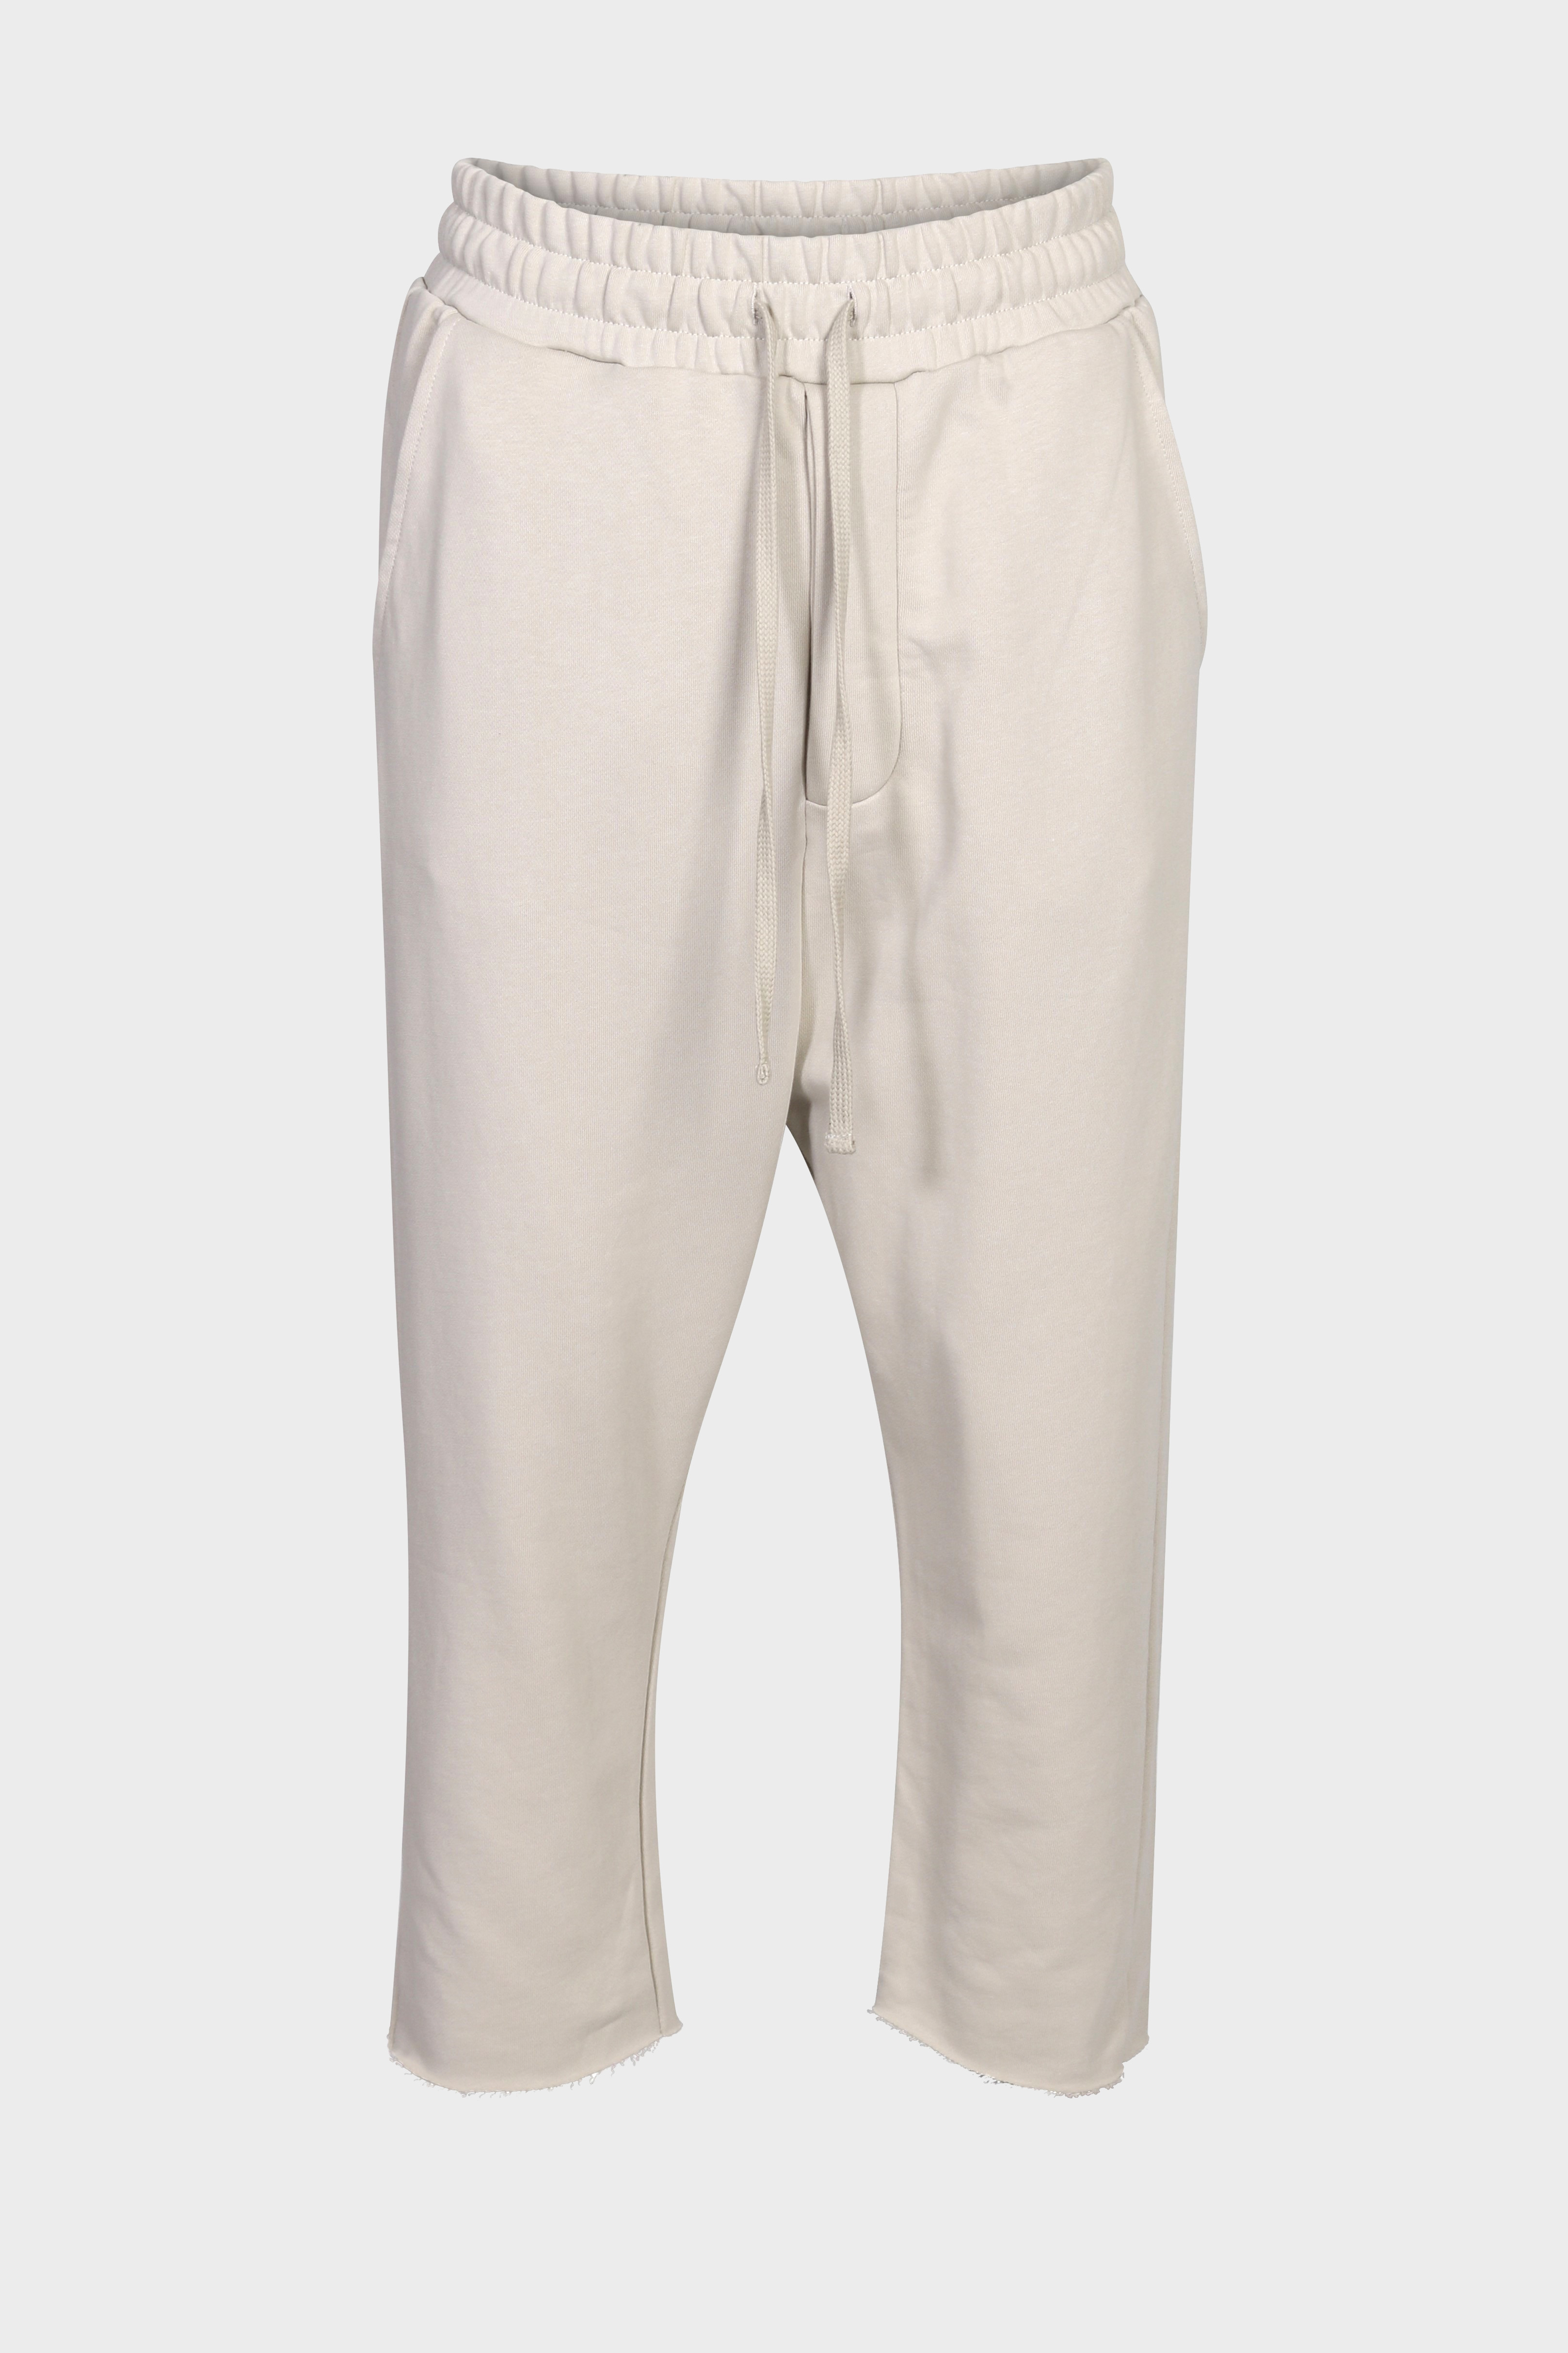 THOM KROM Sweatpant in Sand Shell S